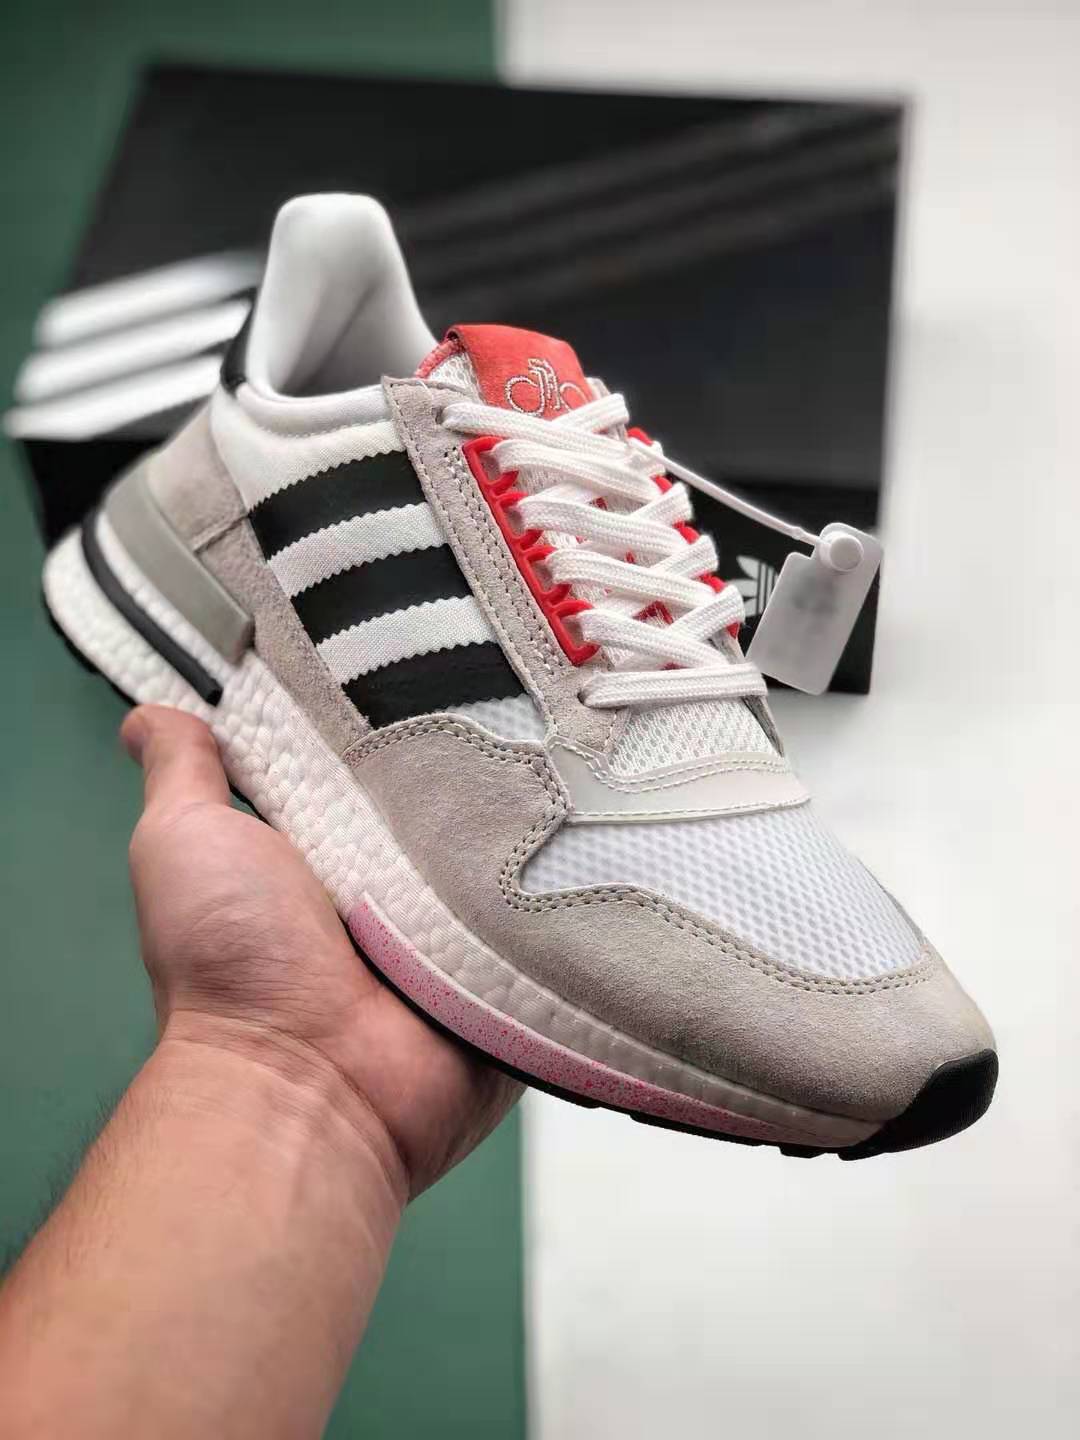 Adidas Forever Bicycle x ZX 500 RM 'Chinese New Year' G27577 - Limited Edition CNY Sneakers